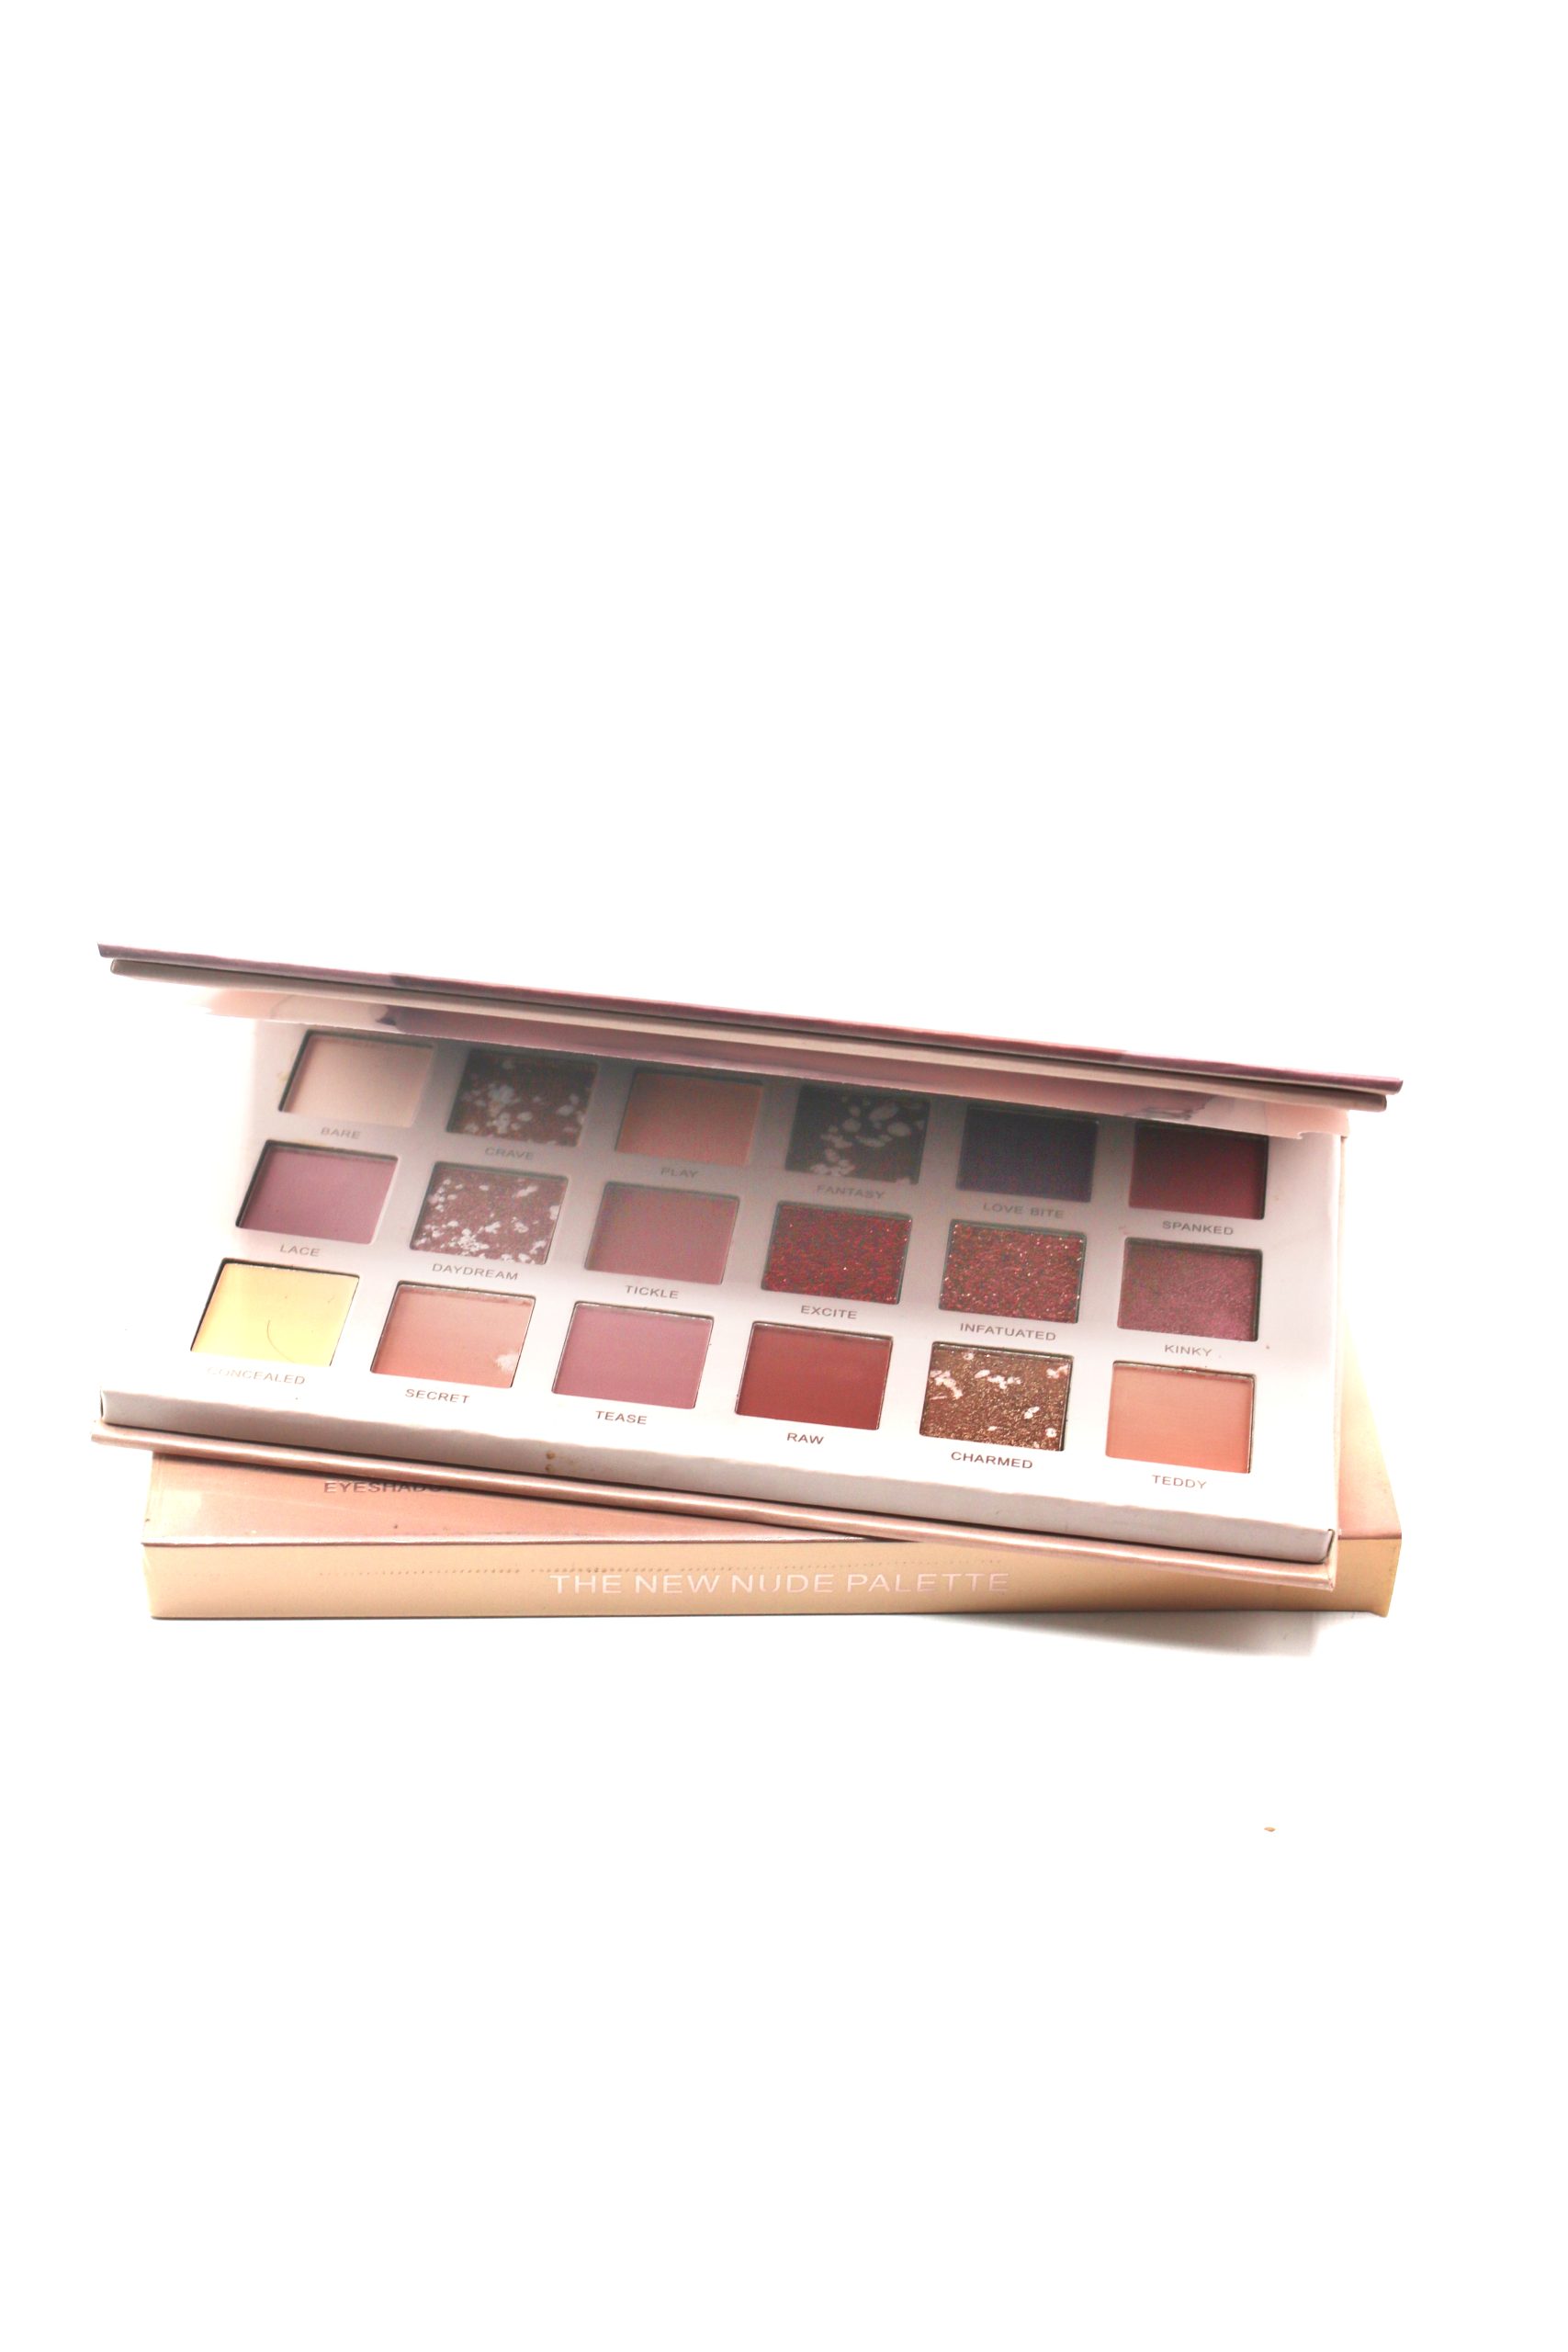 Miss Rose New Nude Professional Makeup Eye shadow Palette